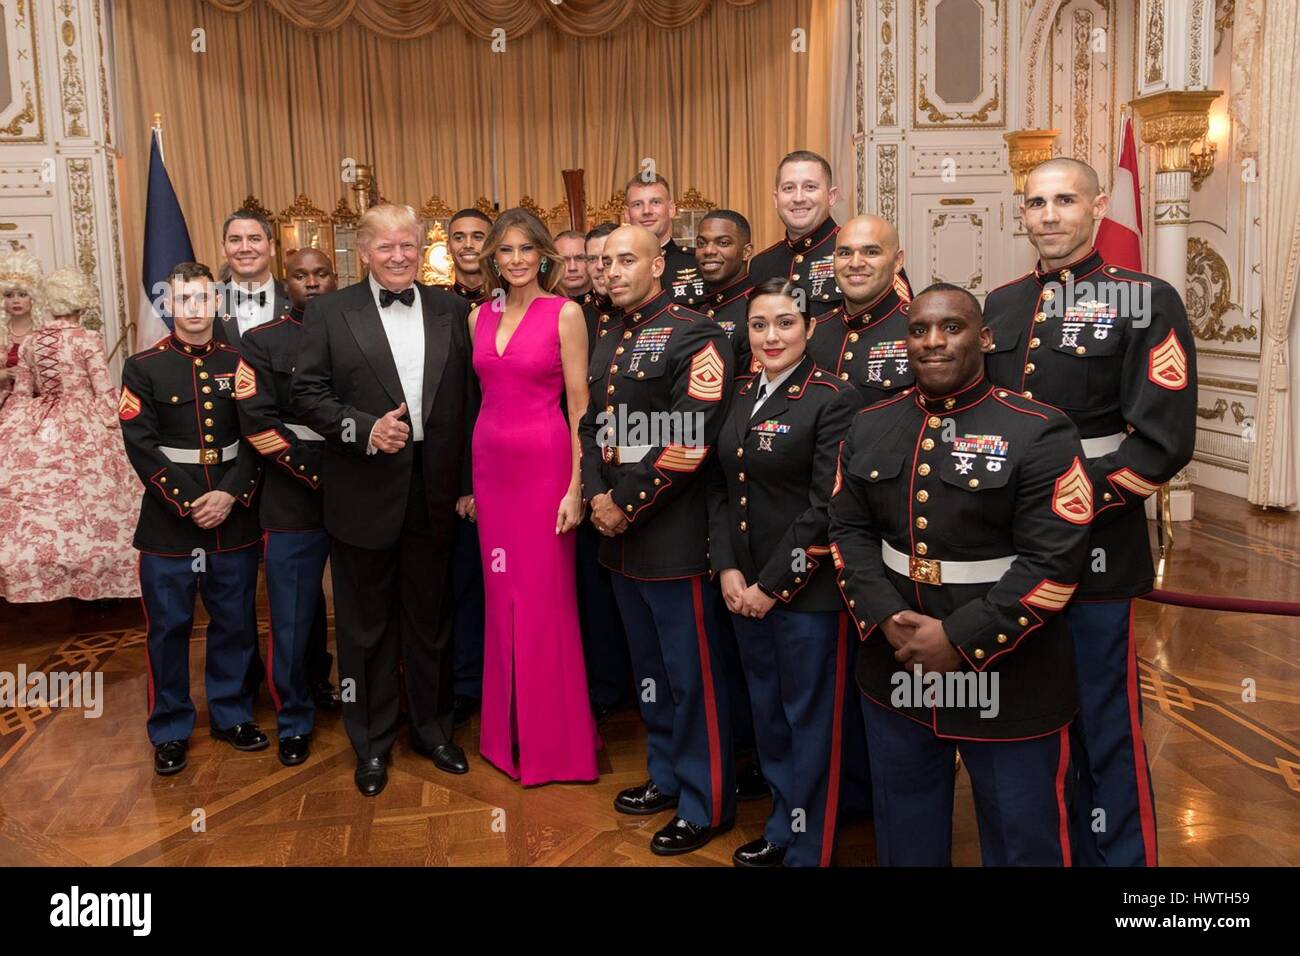 U.S President Donald Trump and First Lady Melania Trump pose for a photo with members of the United States Military prior to attending a private event at The Mar-a-Lago Club February 4, 2017 in Palm Beach, Florida. Stock Photo